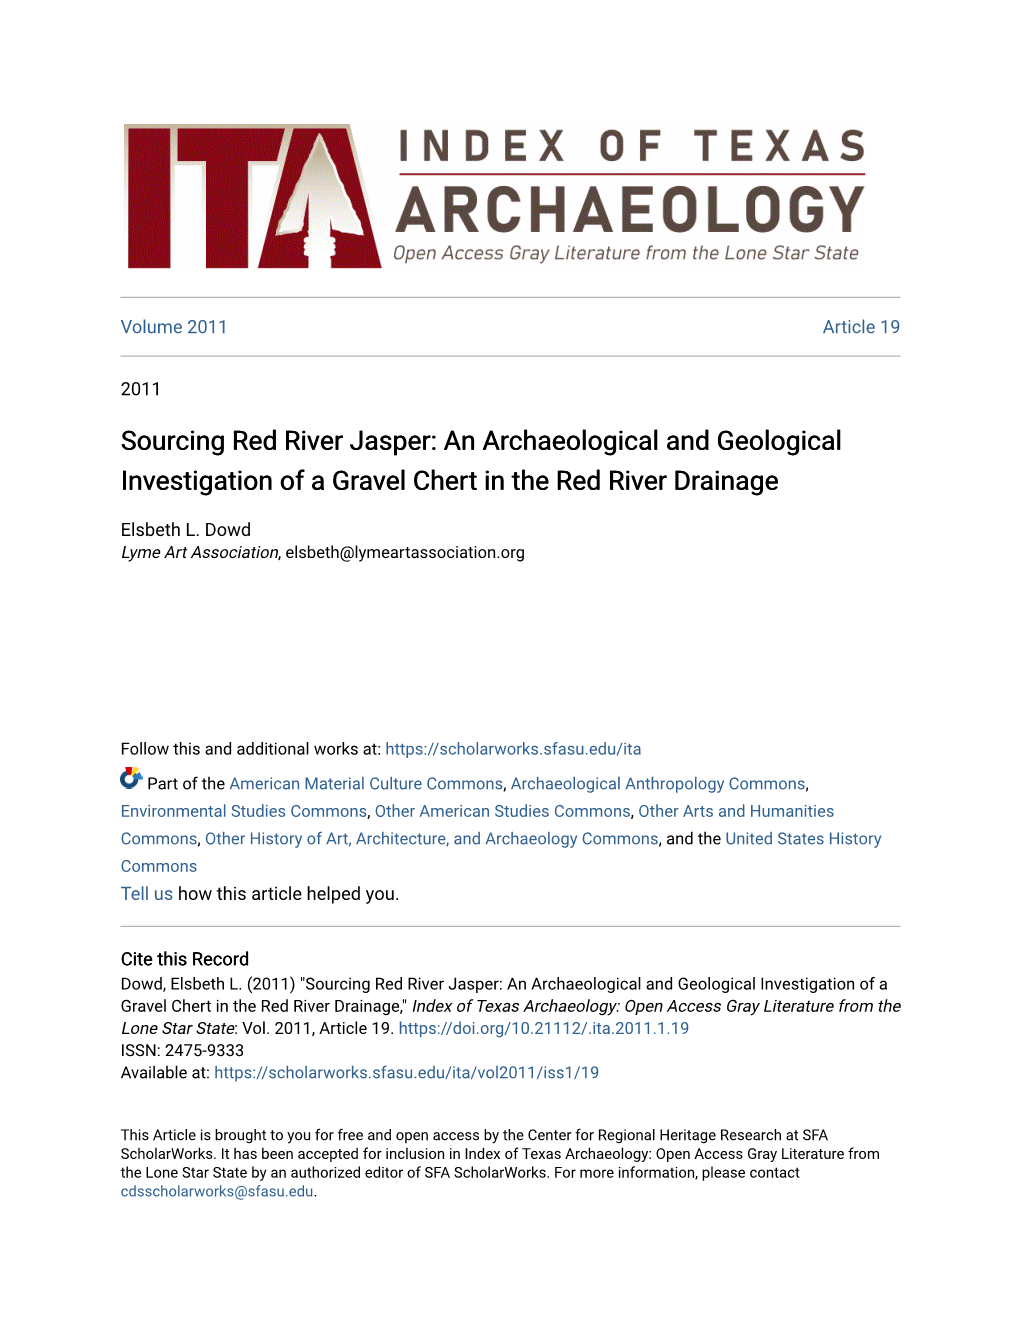 Sourcing Red River Jasper: an Archaeological and Geological Investigation of a Gravel Chert in the Red River Drainage